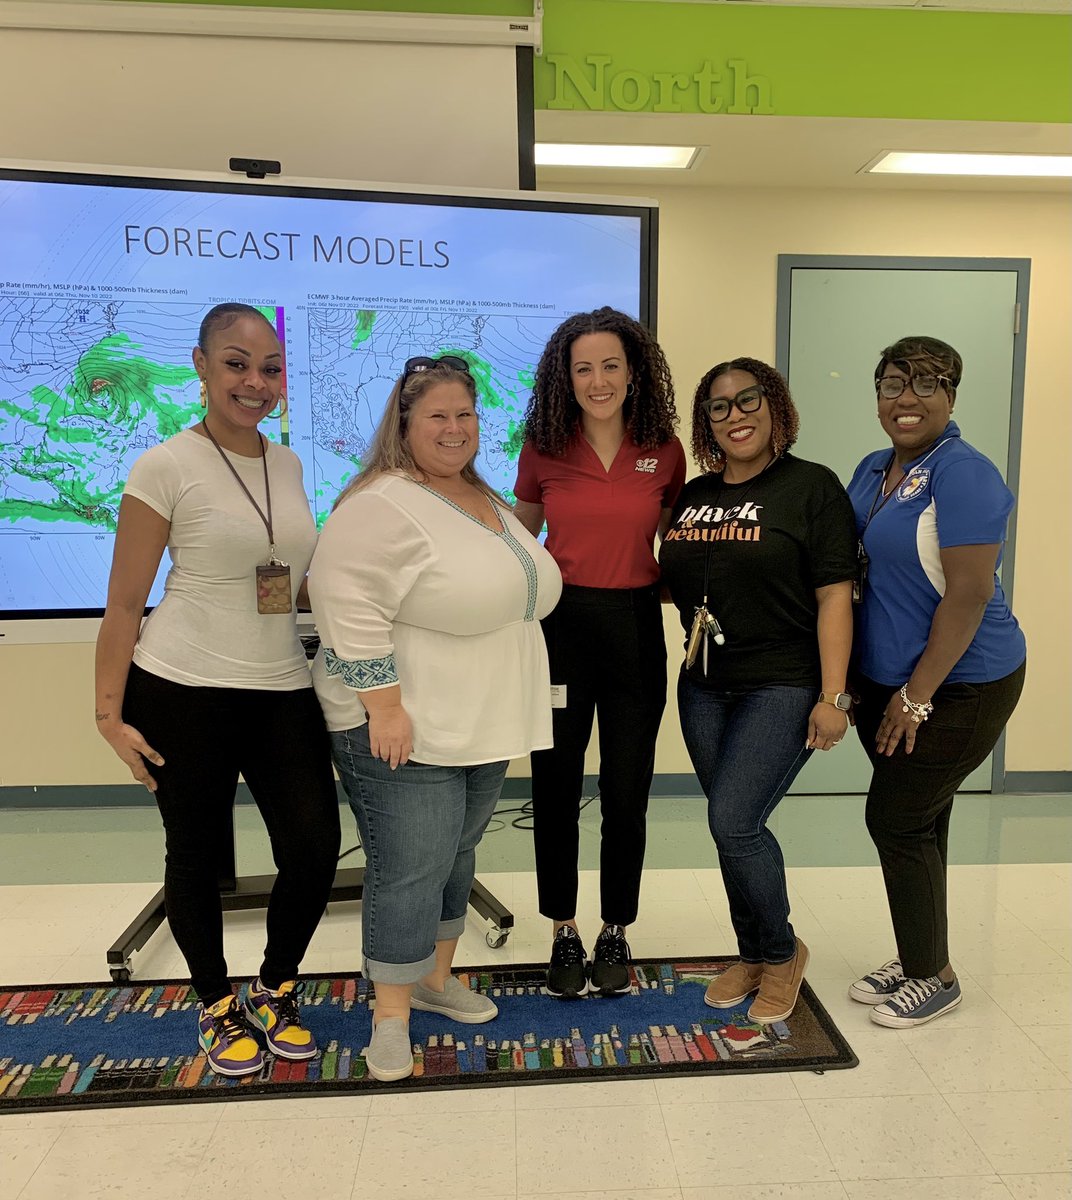 Thank you @JenCollinsWx for stopping by the Eagle Dome and taking the time to present to our 5th grade Scholars! Science class was certainly interactive today 🌦️☔️ #SOARingEagles #WeatherClimate @CBS12 @Lincoln_Porter @1jazzyAKA @C_Collins_1